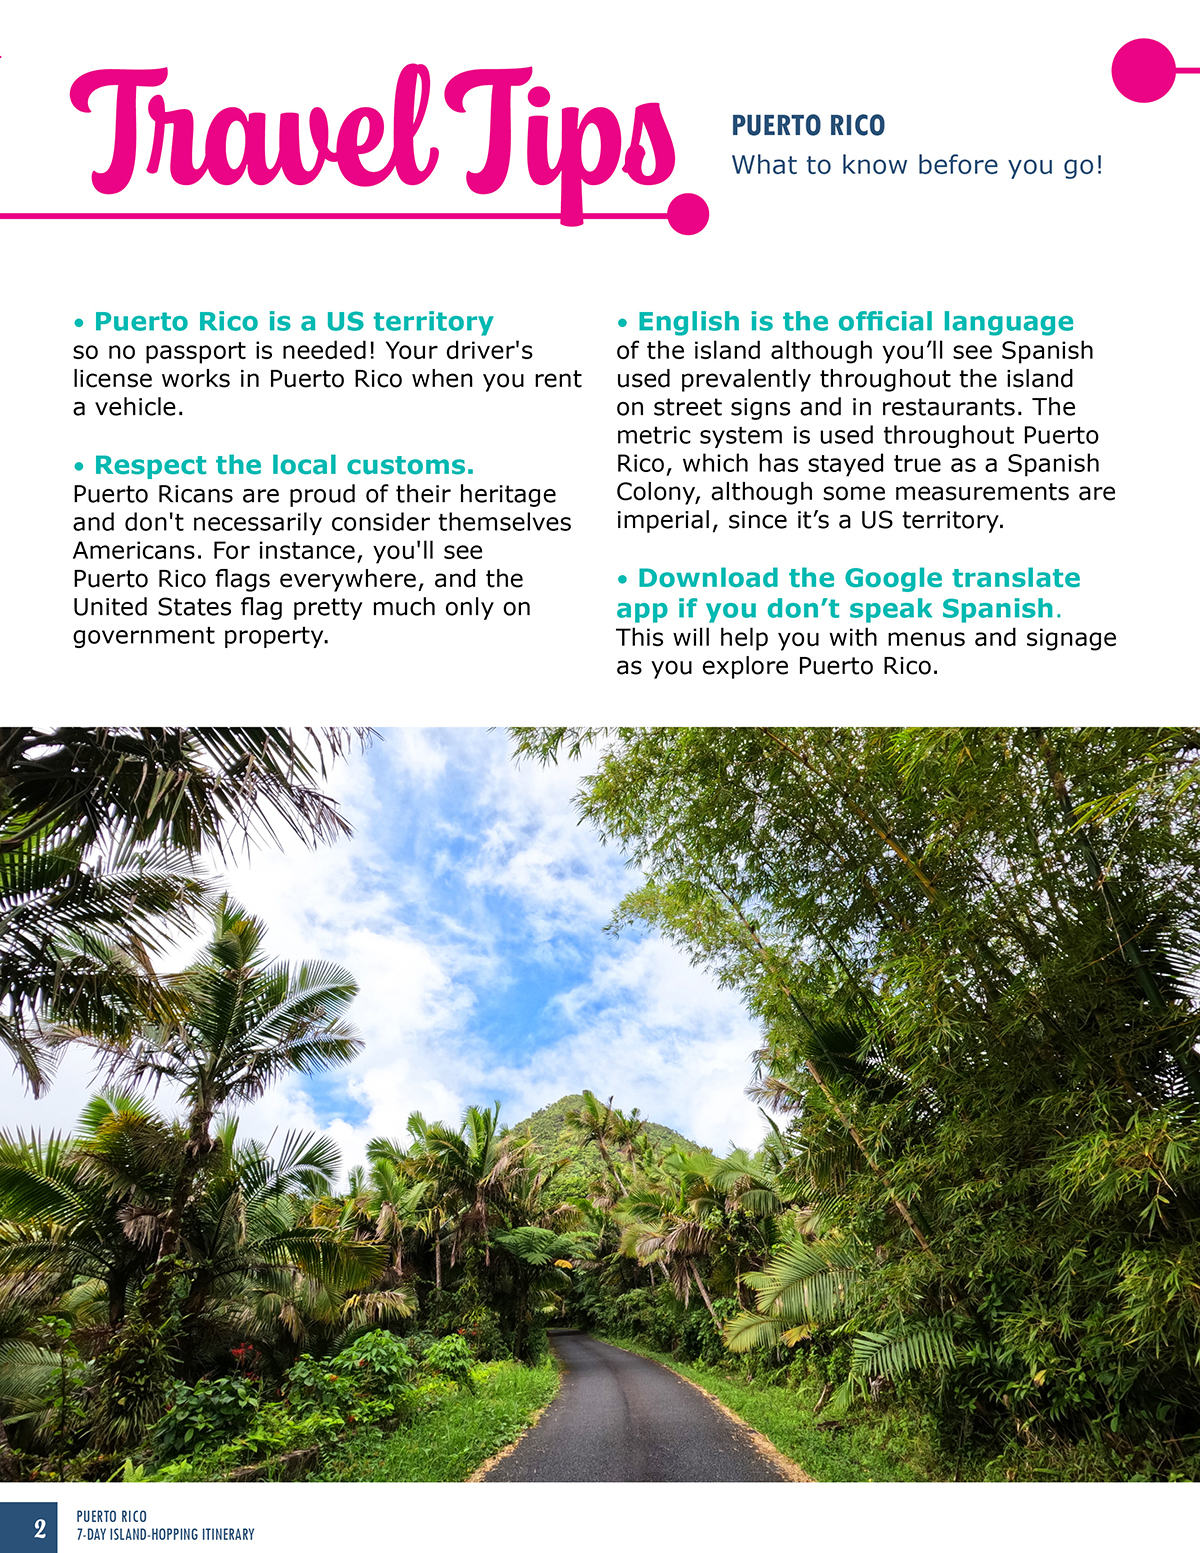 photo of travel guide with travel tips at top and text with photo of rainforest